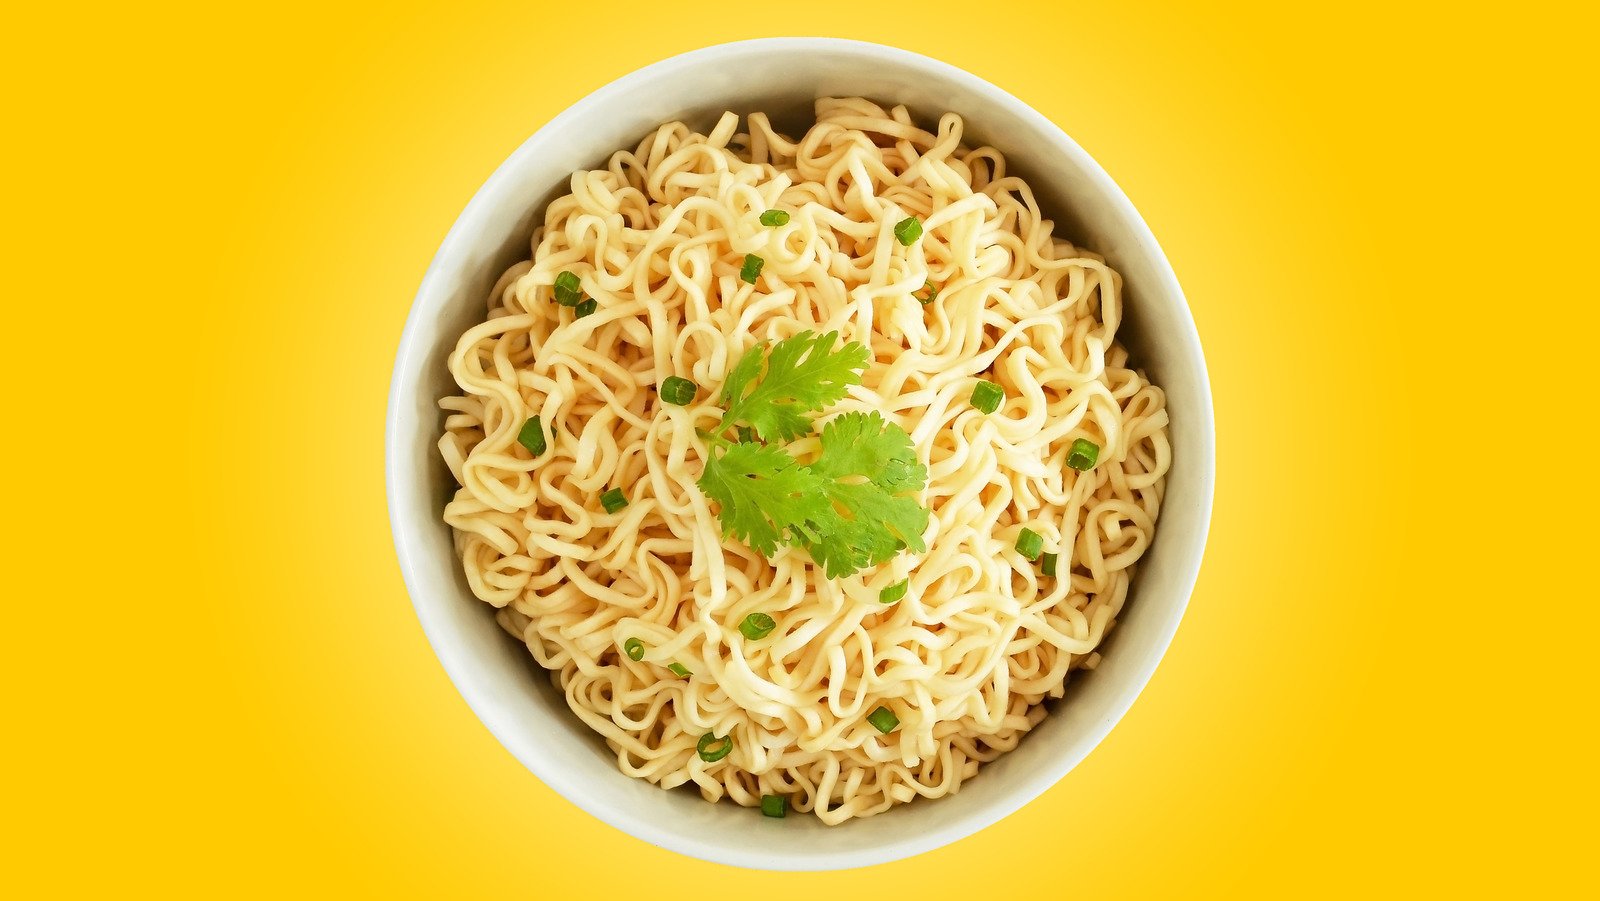 Popular Instant Ramen Brands Ranked From Worst To Best - Mashed